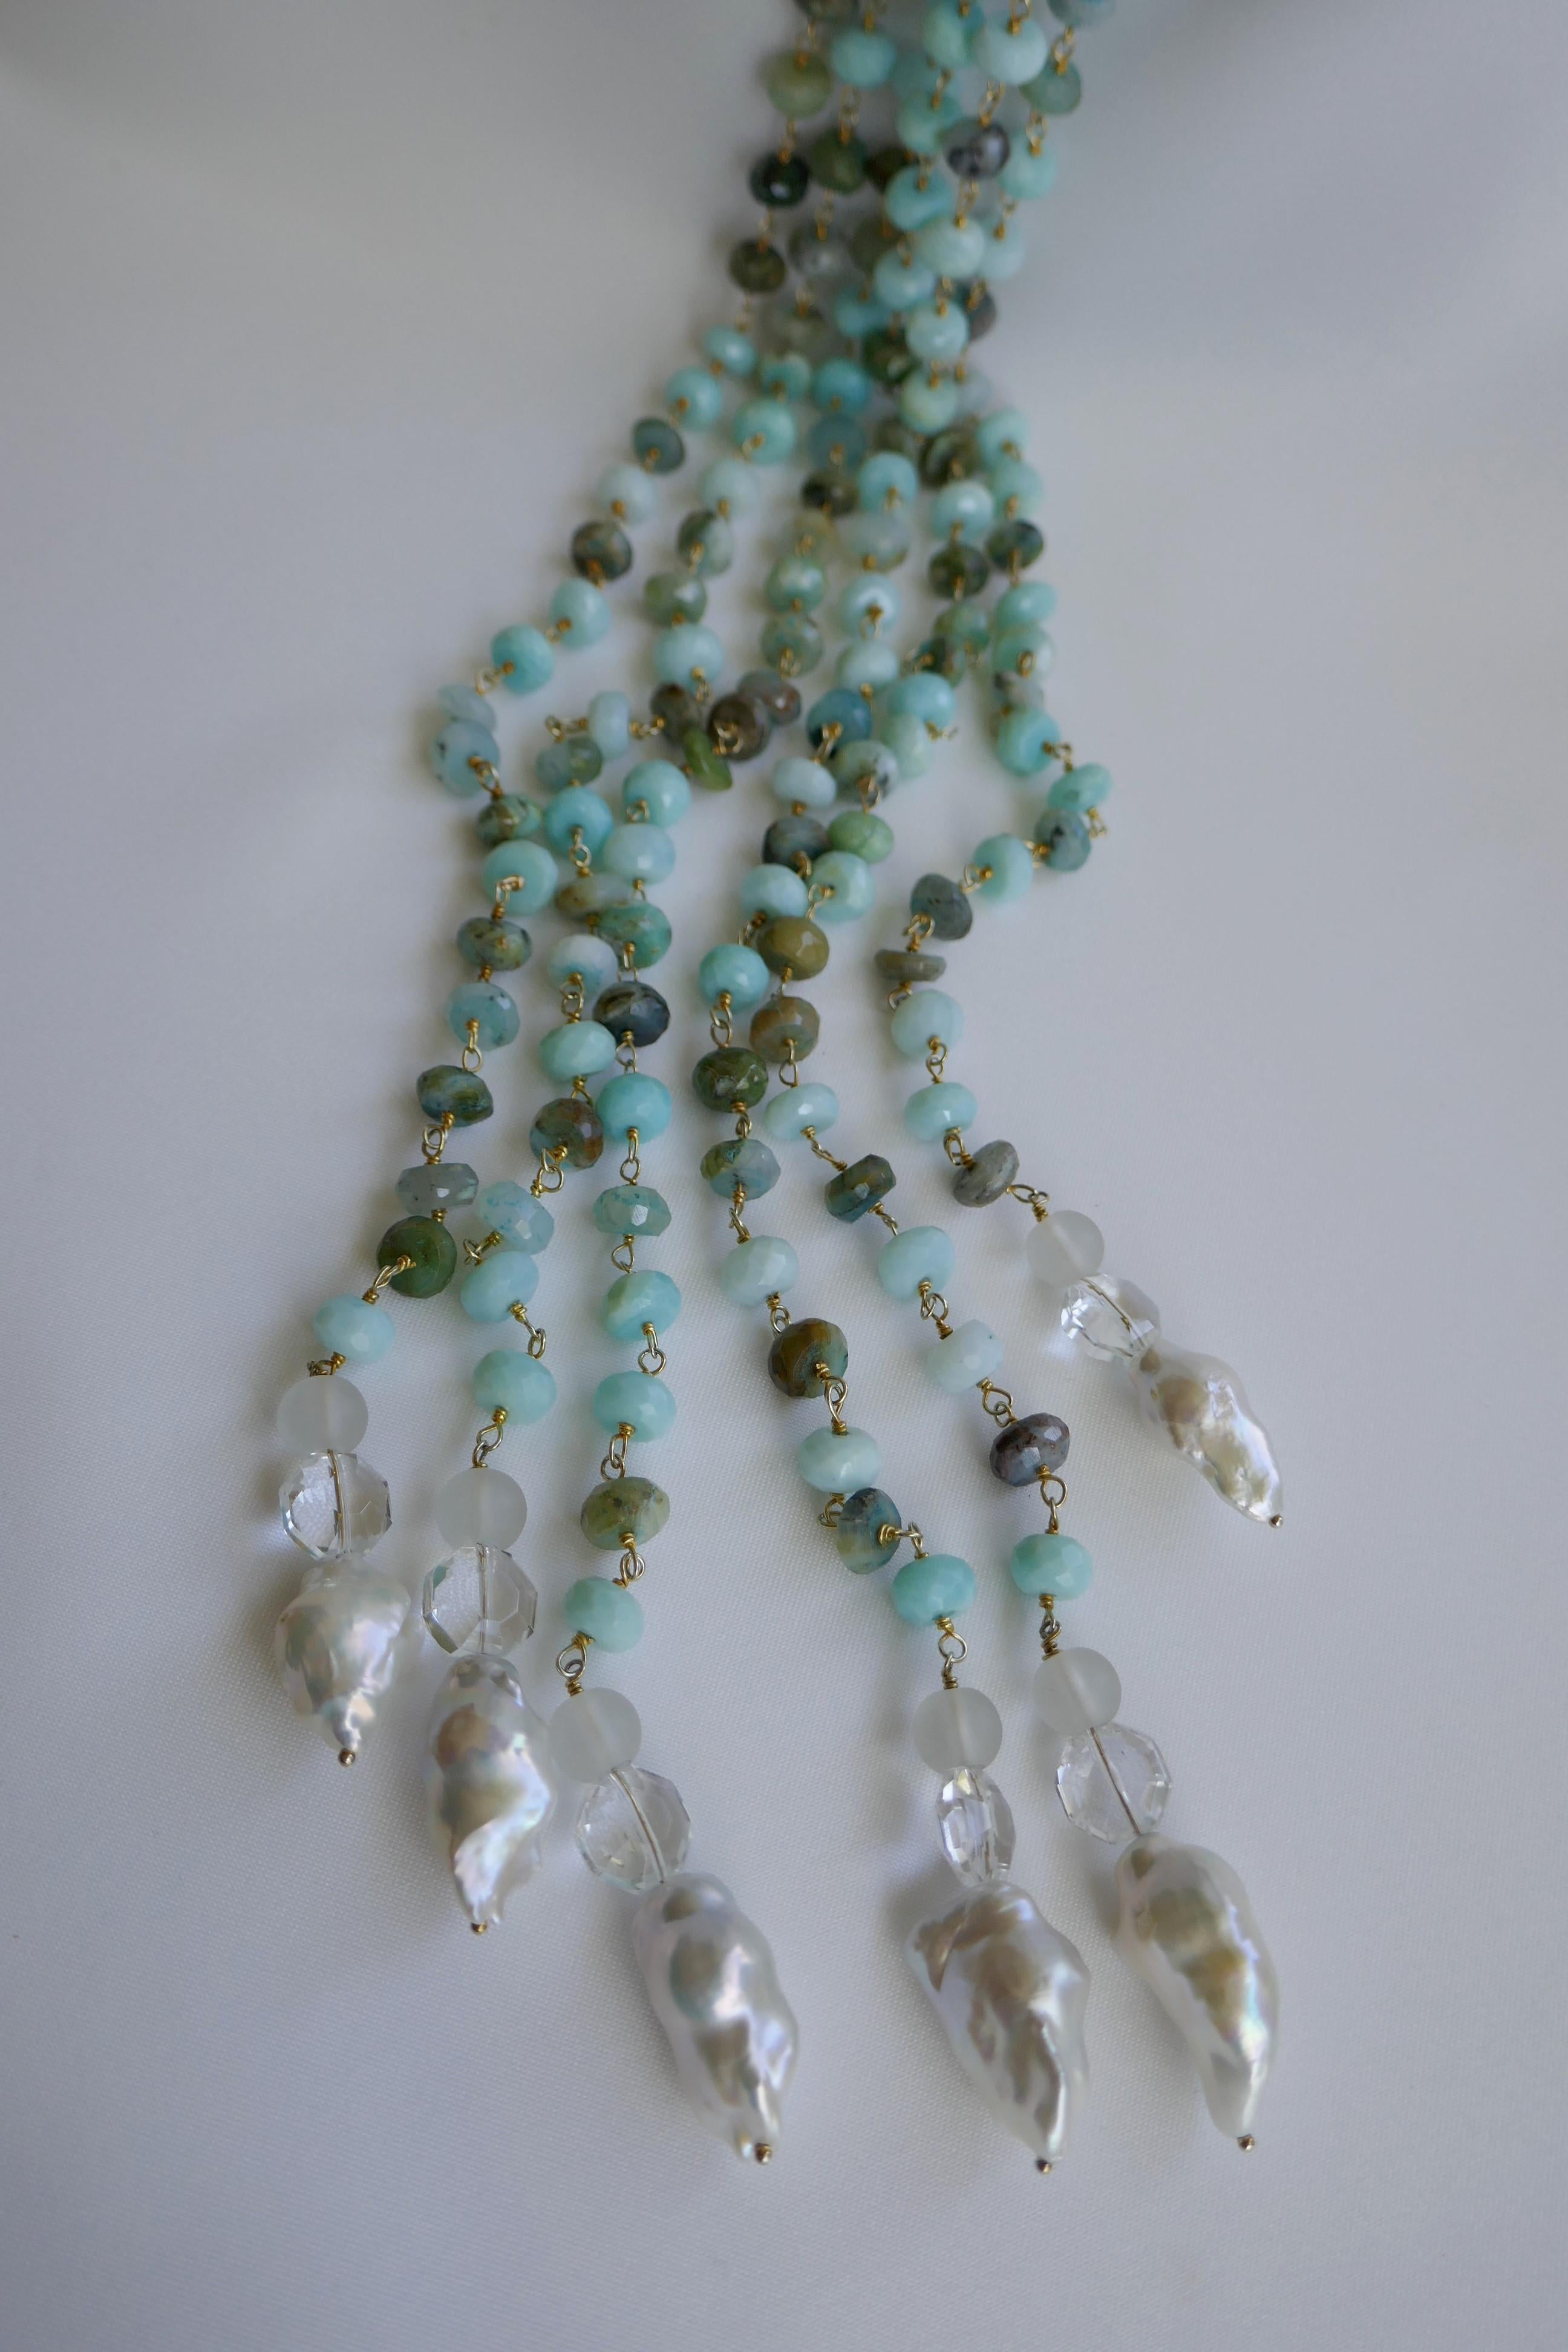 This is a three individual strand Peruvian opal (aquamarine in color) faceted roundels 8-9mm lariat necklace finished with frosted and polished rock crystal and baroque cultured pearls. The Peruvian Opal beads are wired wrapped in vermeil 925